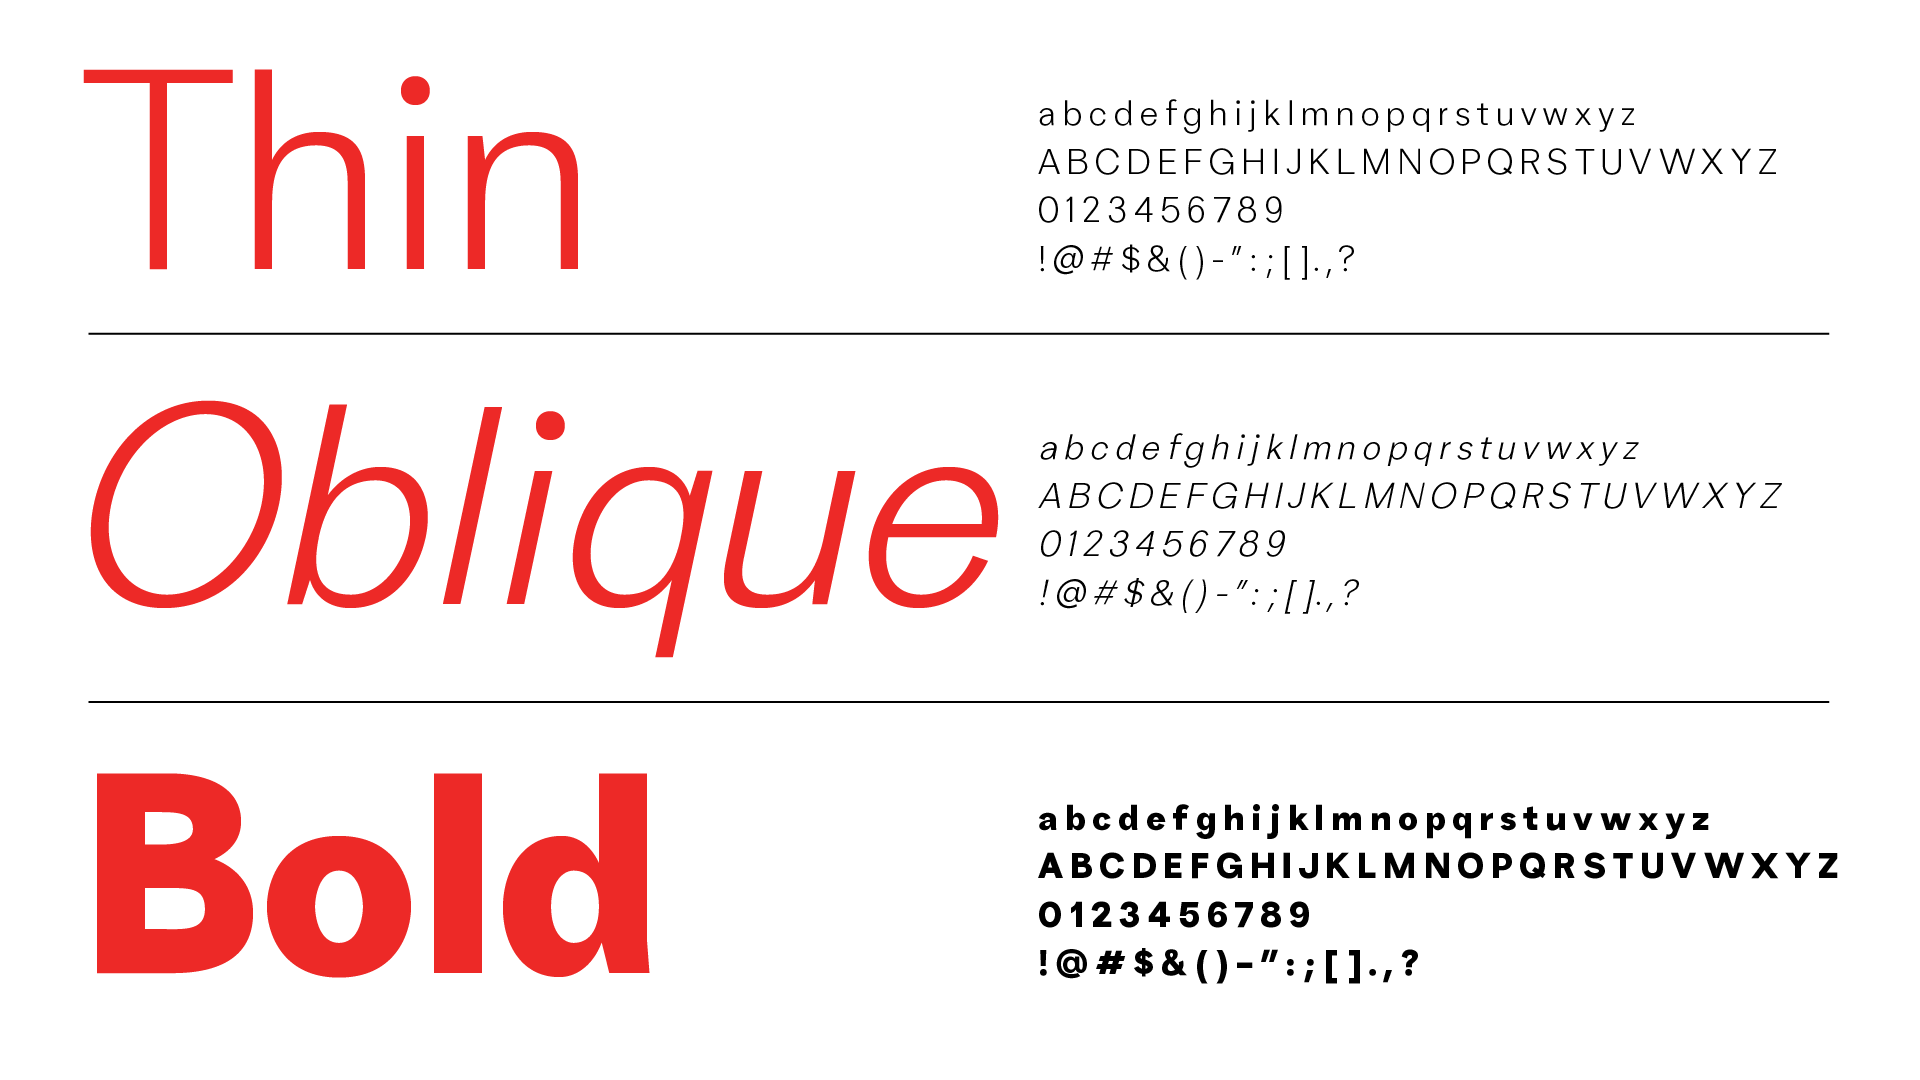 Font Style: Regular, Oblique, and Bold